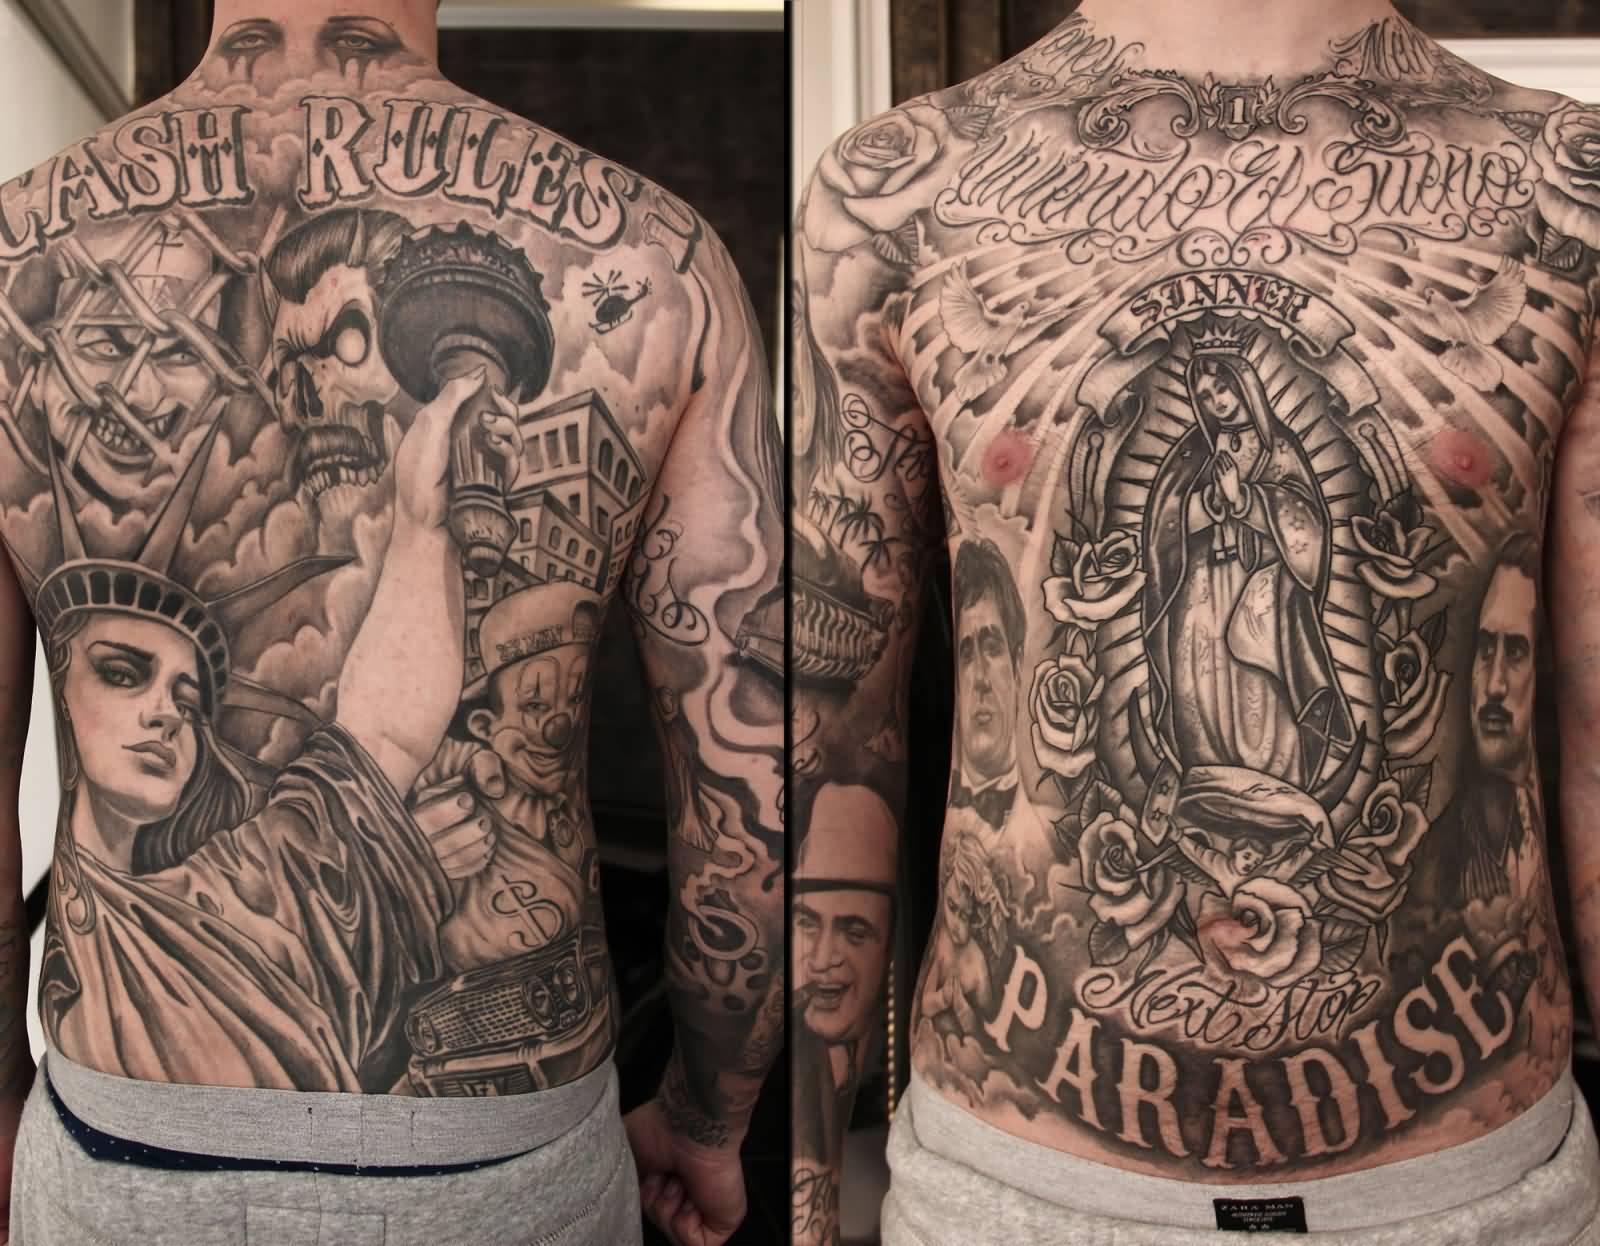 Grey Ink Cash Rules And Paradise Chicano Tattoos on Full Body